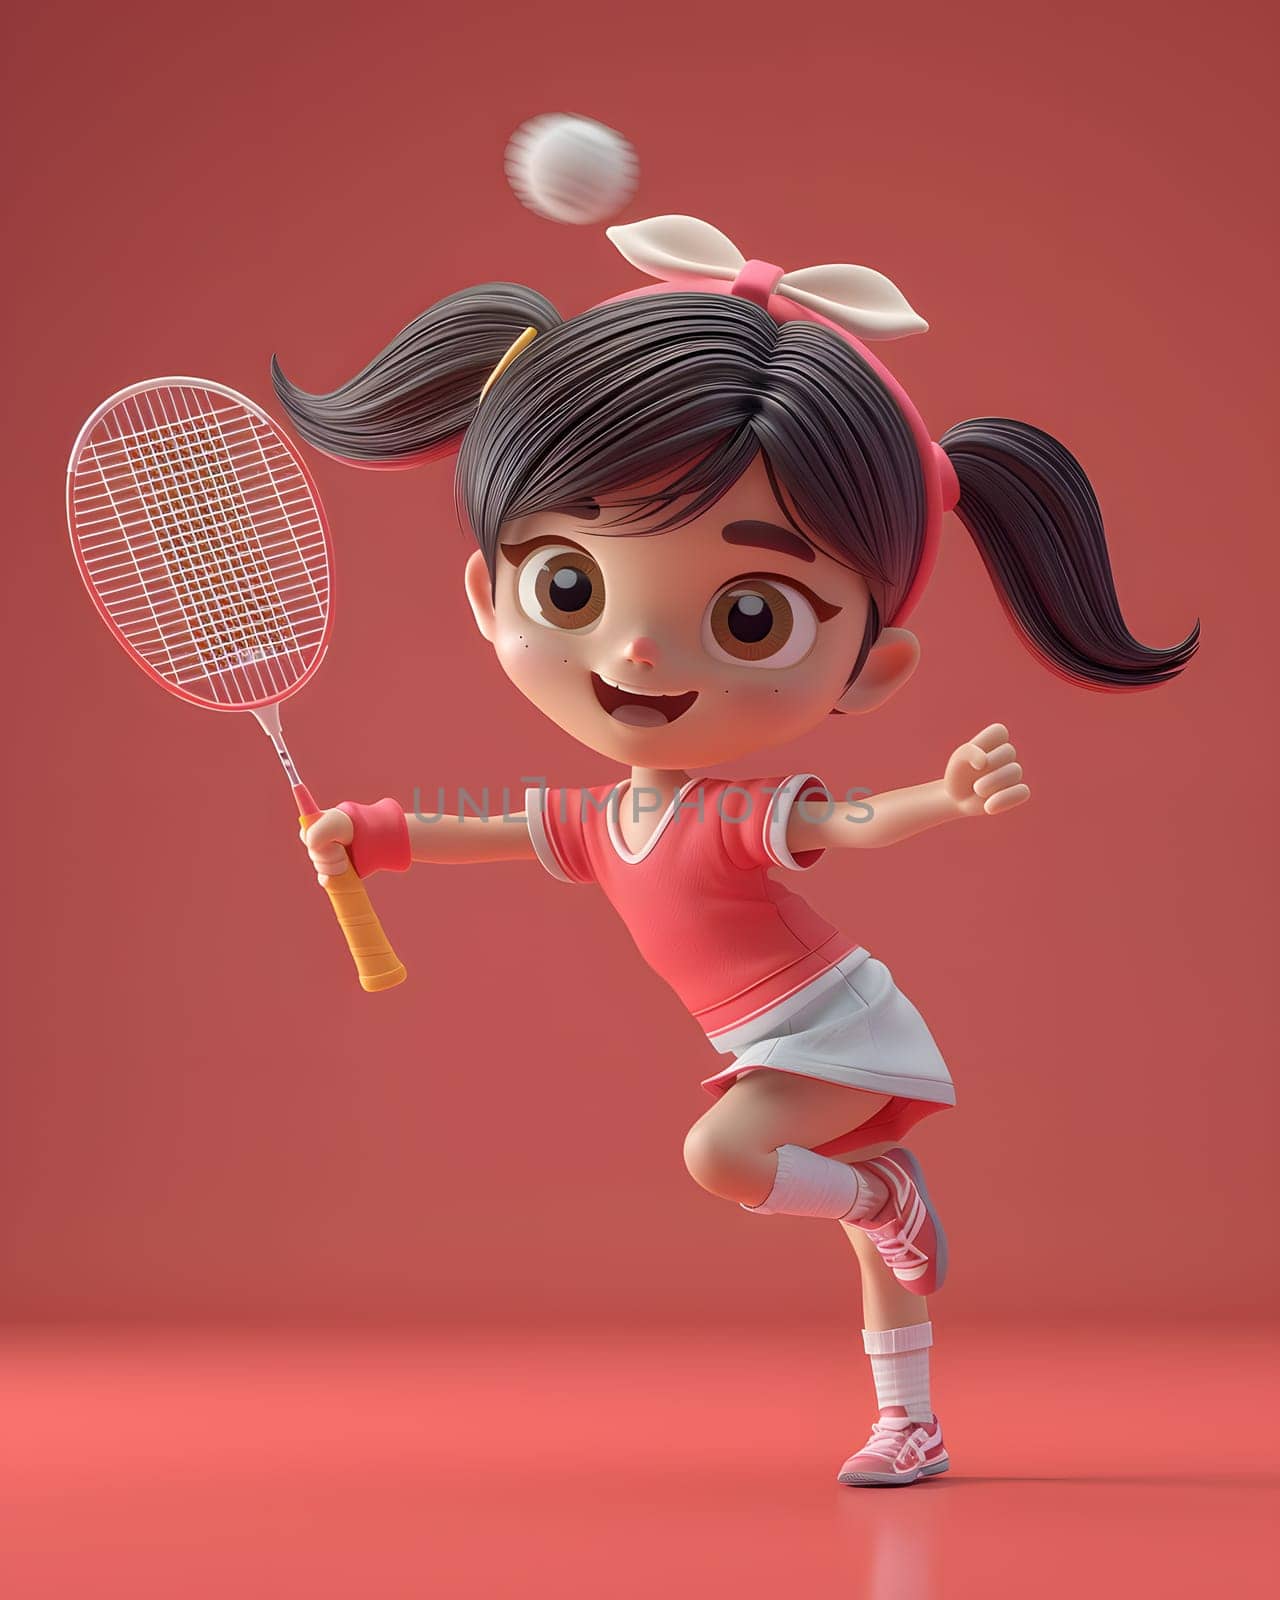 An animated cartoon girl in a Carmine uniform is happily playing badminton with a toy racket, creating a joyful and artistic event